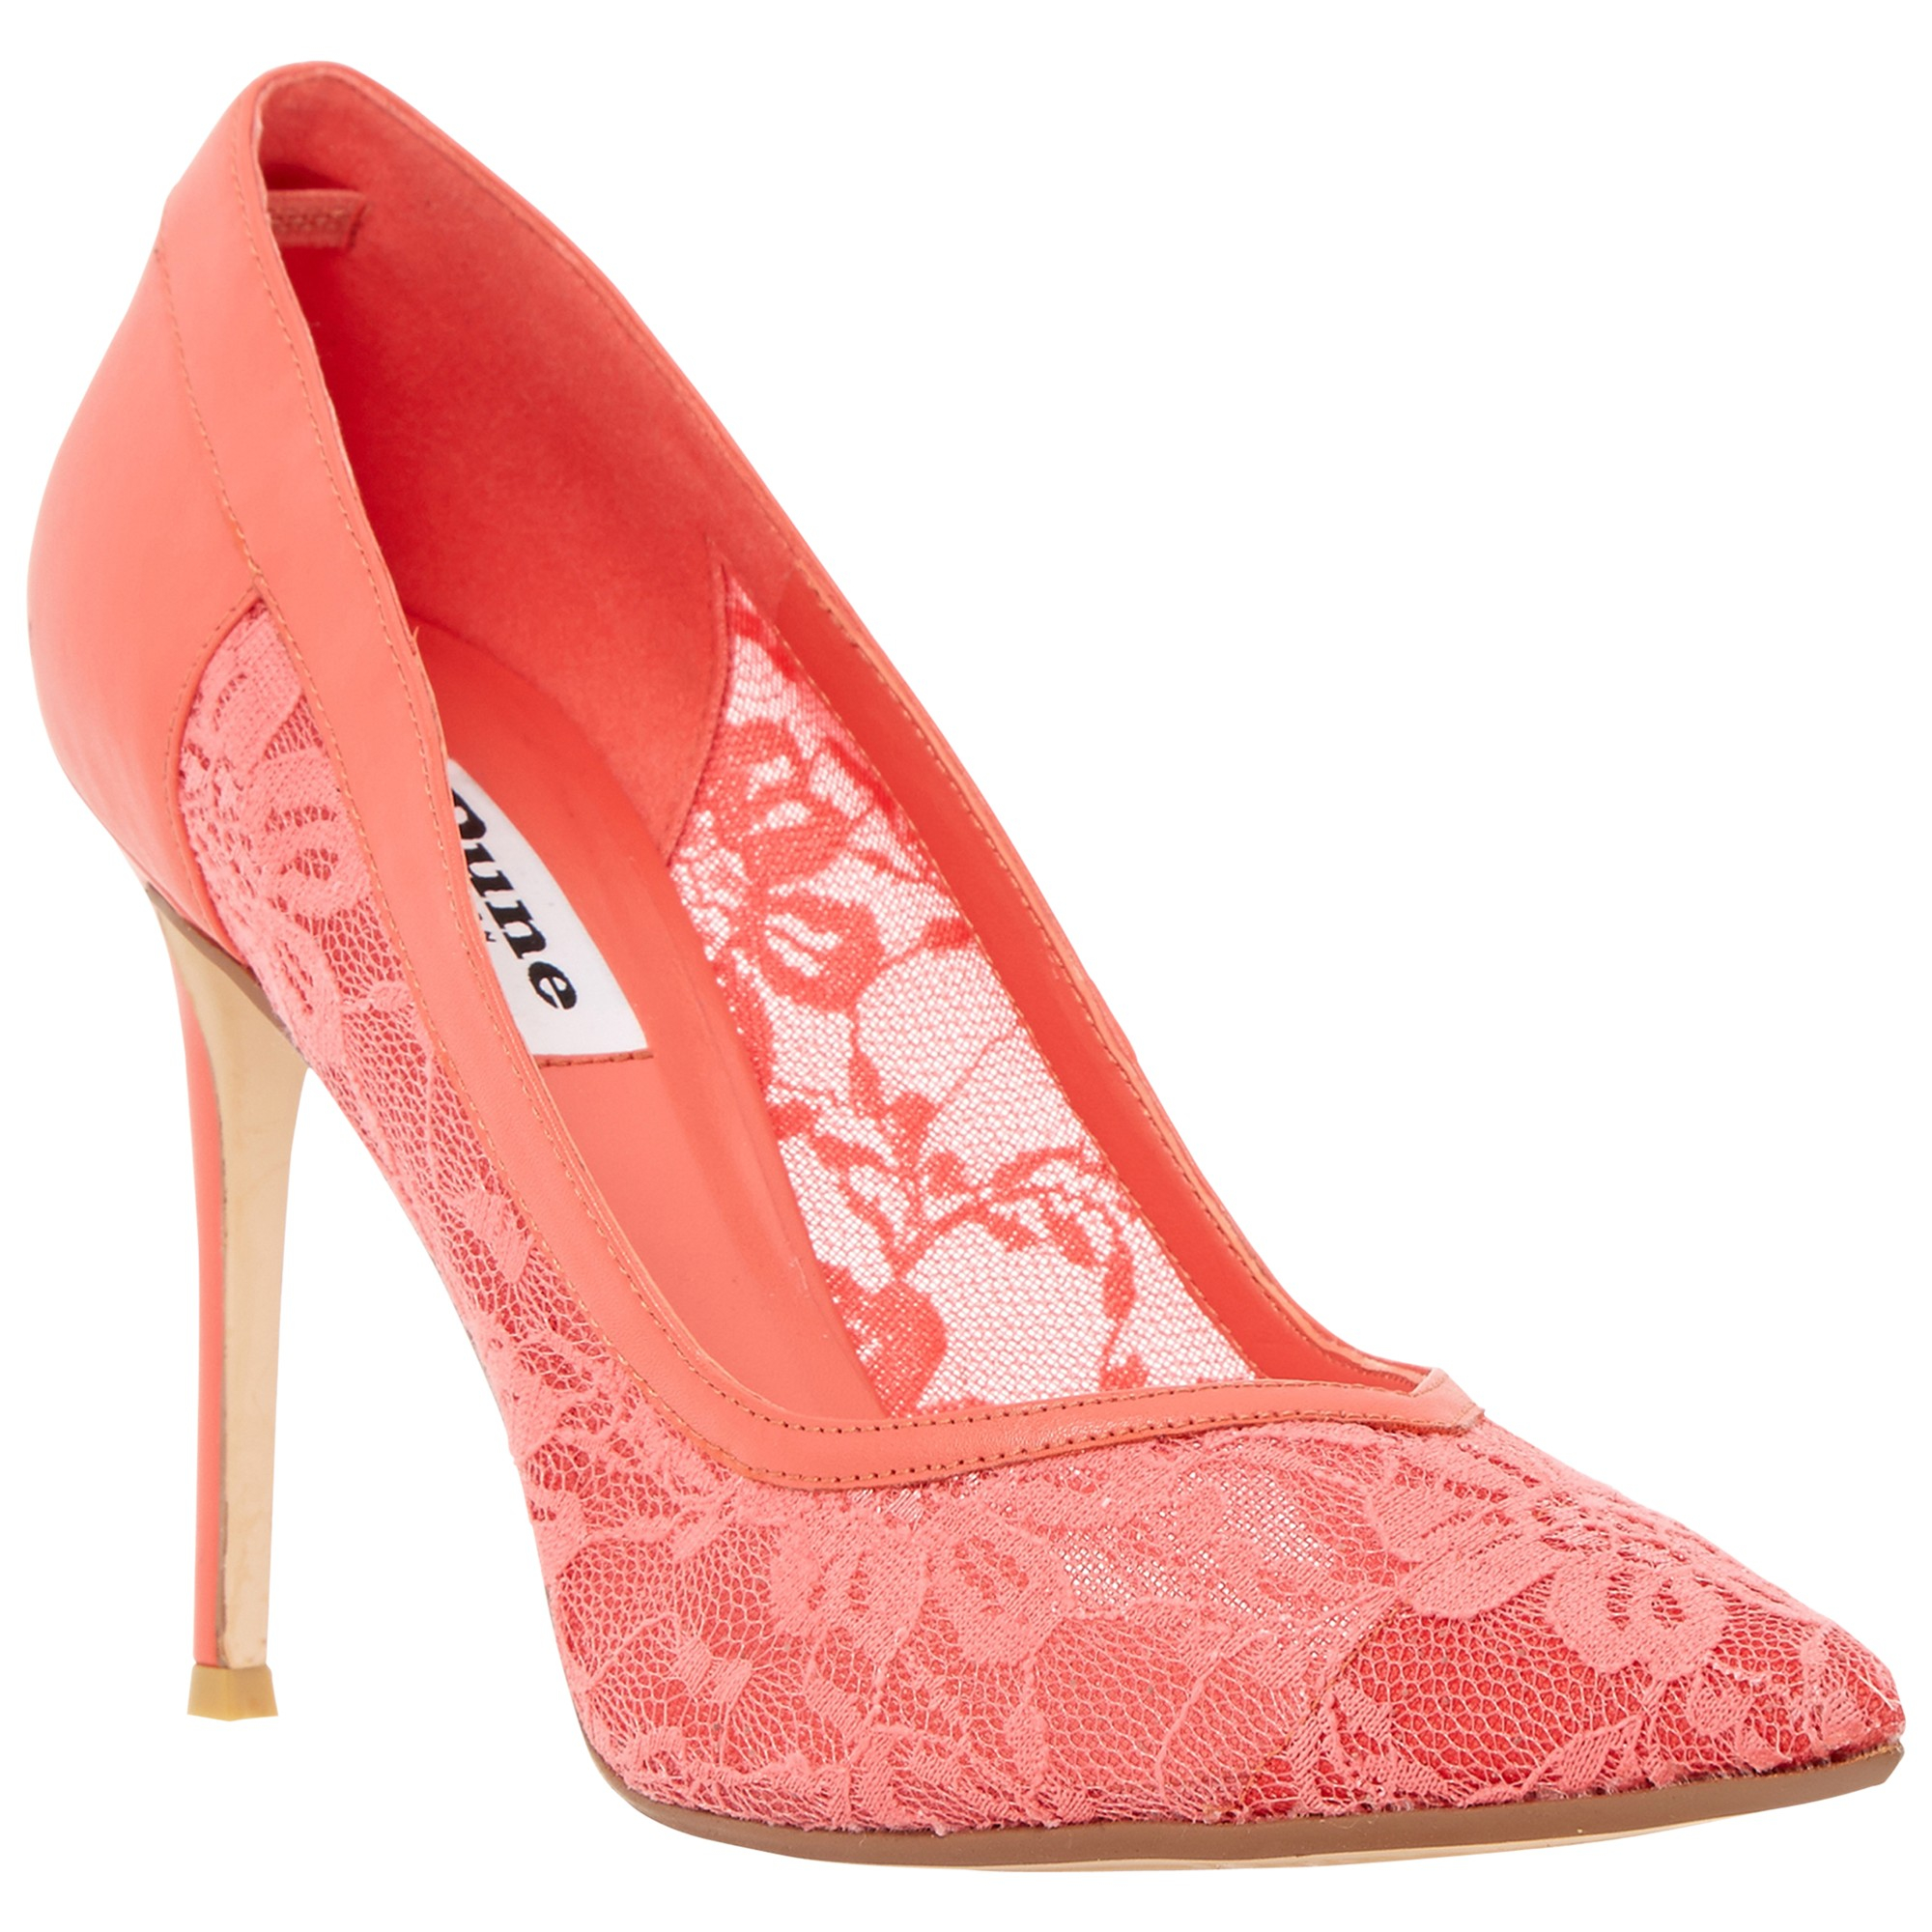 Dune Buffie Lace Court Shoes in Pink - Lyst